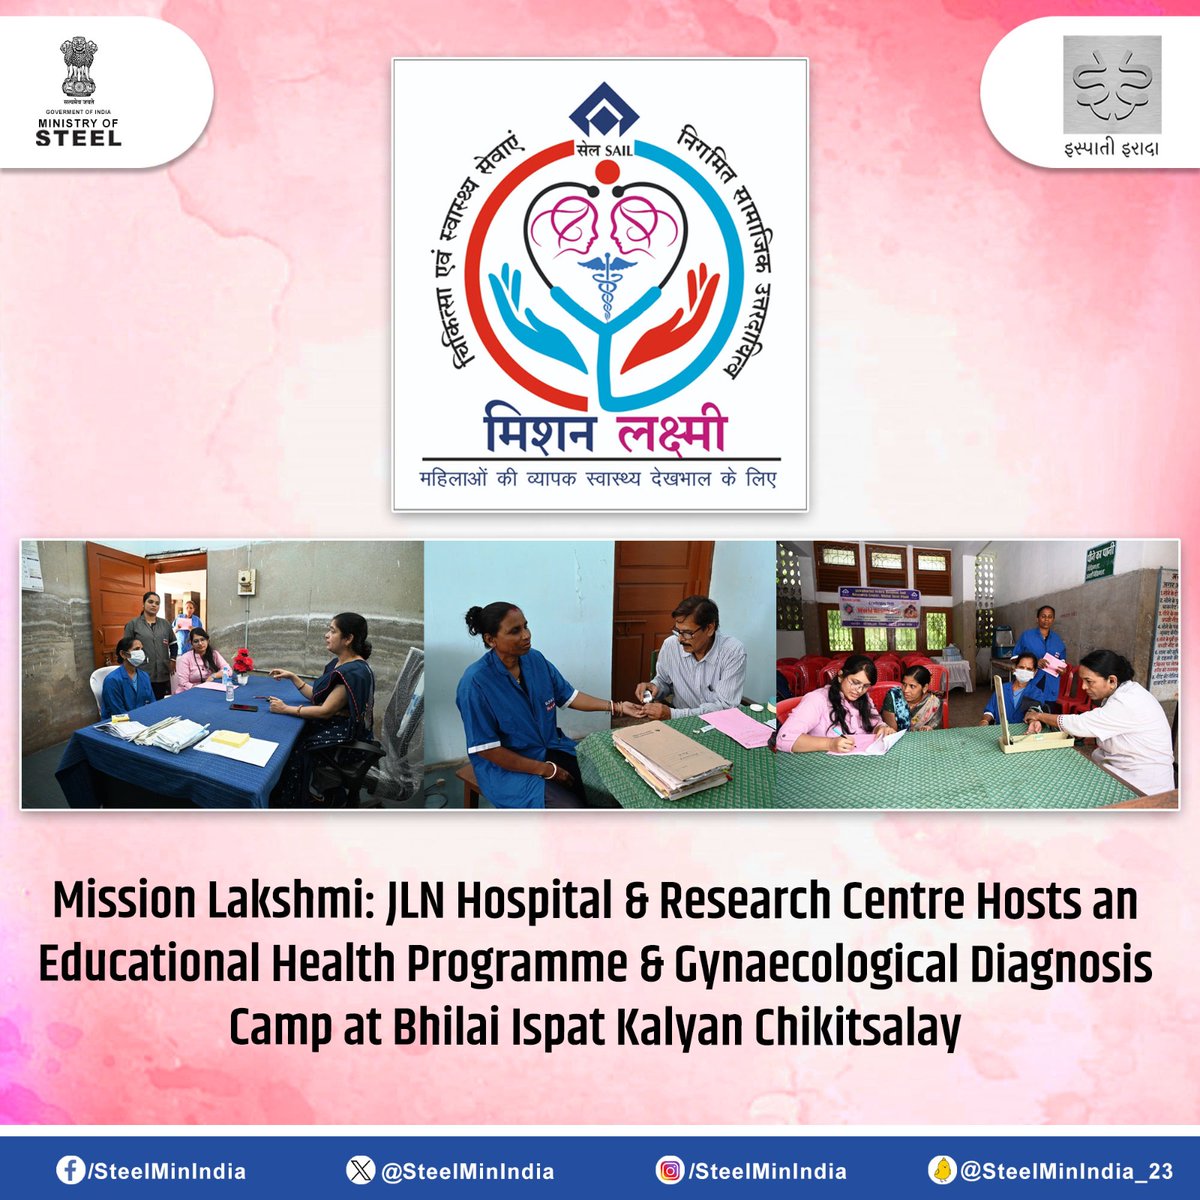 Empowering Women's Health! 'Mission Lakshmi' by JLN Hospital & Research Centre brings an Educational Health Programme & free Gynaecological Diagnosis Camp to Bhilai Ispat Kalyan Chikitsalay. #SAIL #Bhilai #MissionLakshmi #HealthcareForAll #WomenEmpowerment